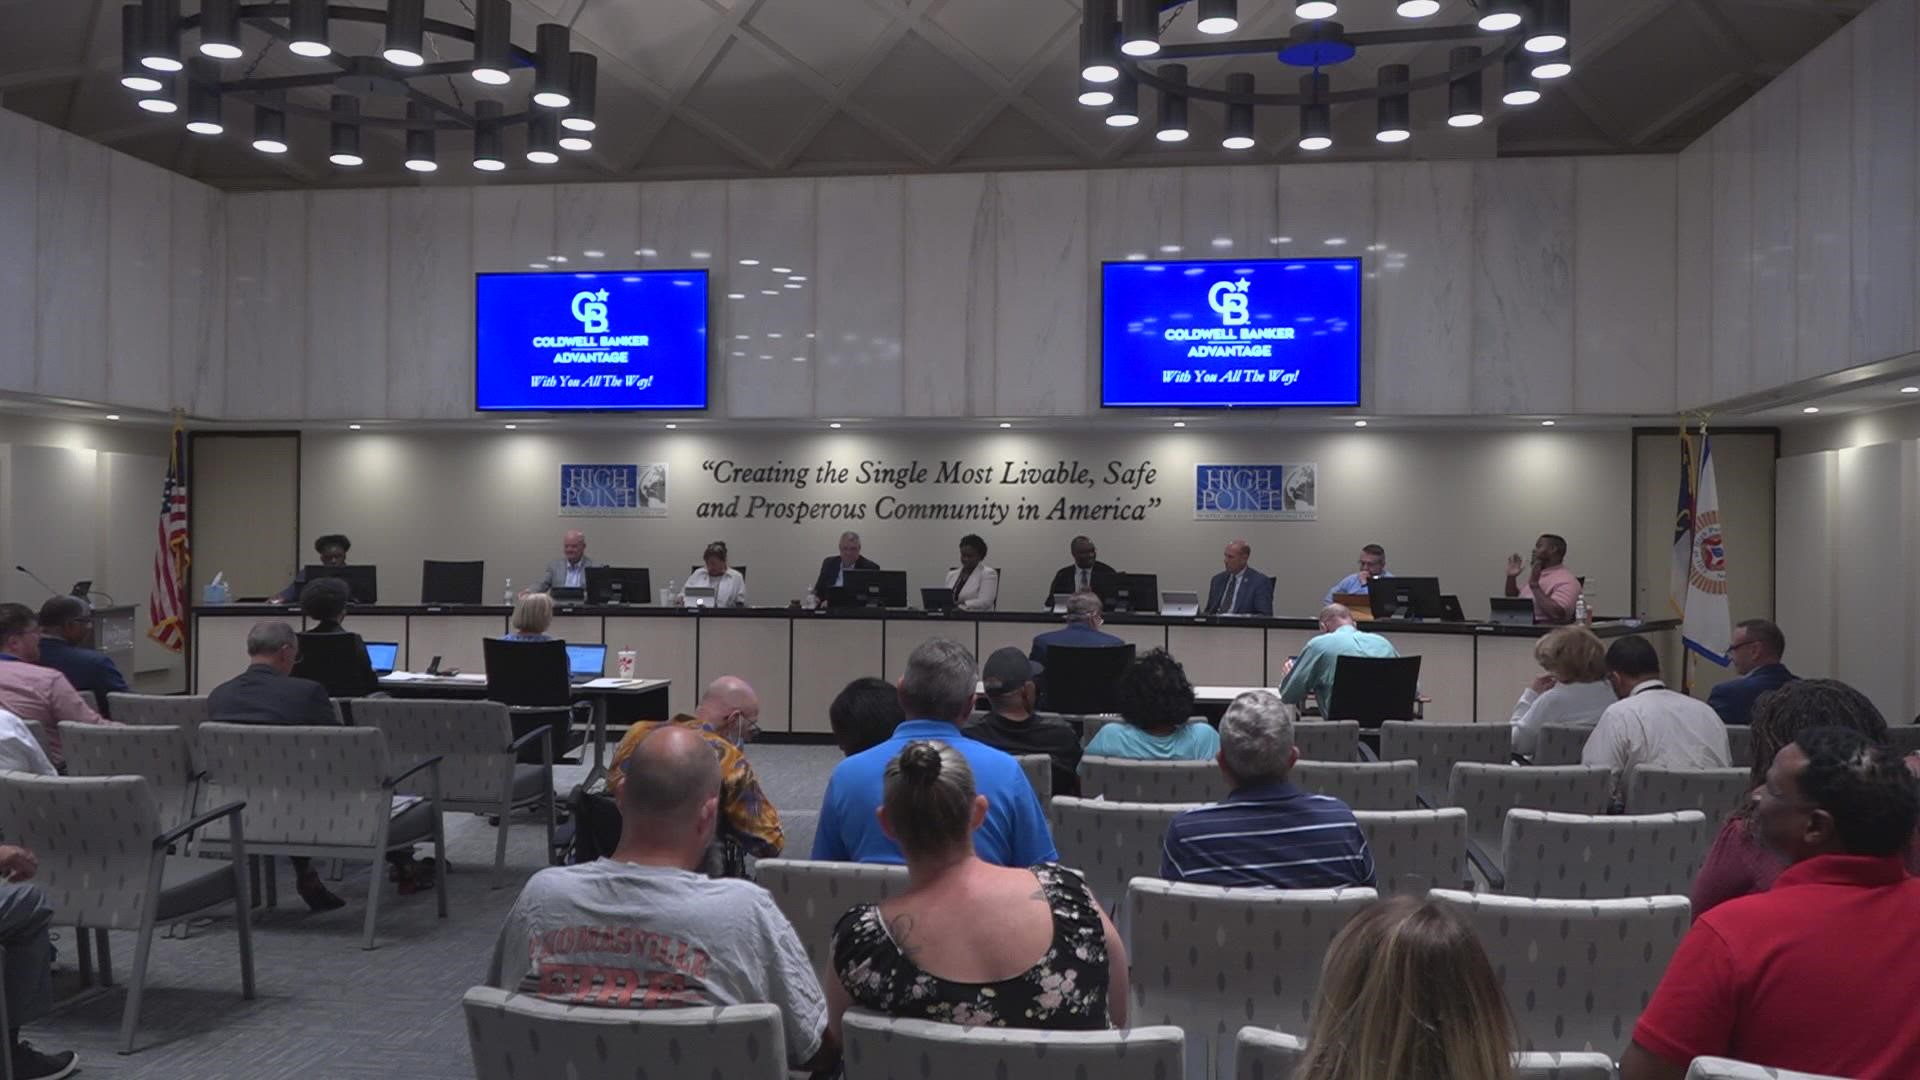 One thing on the minds of community members at Monday’s council meeting was fair housing.